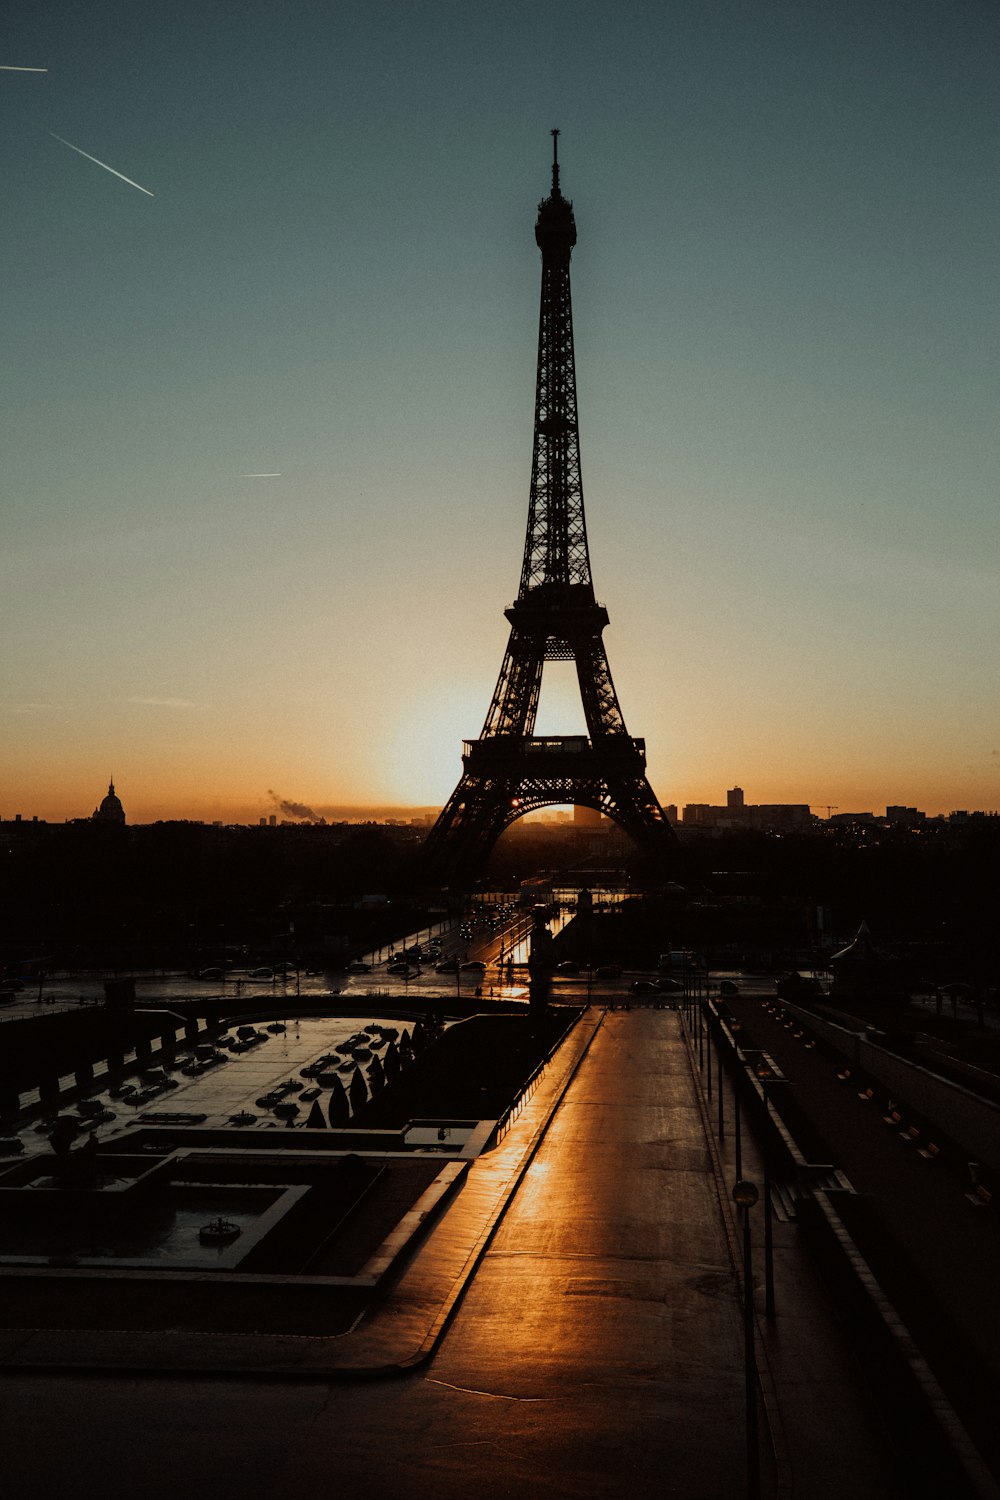 Eiffel tower during ssunset